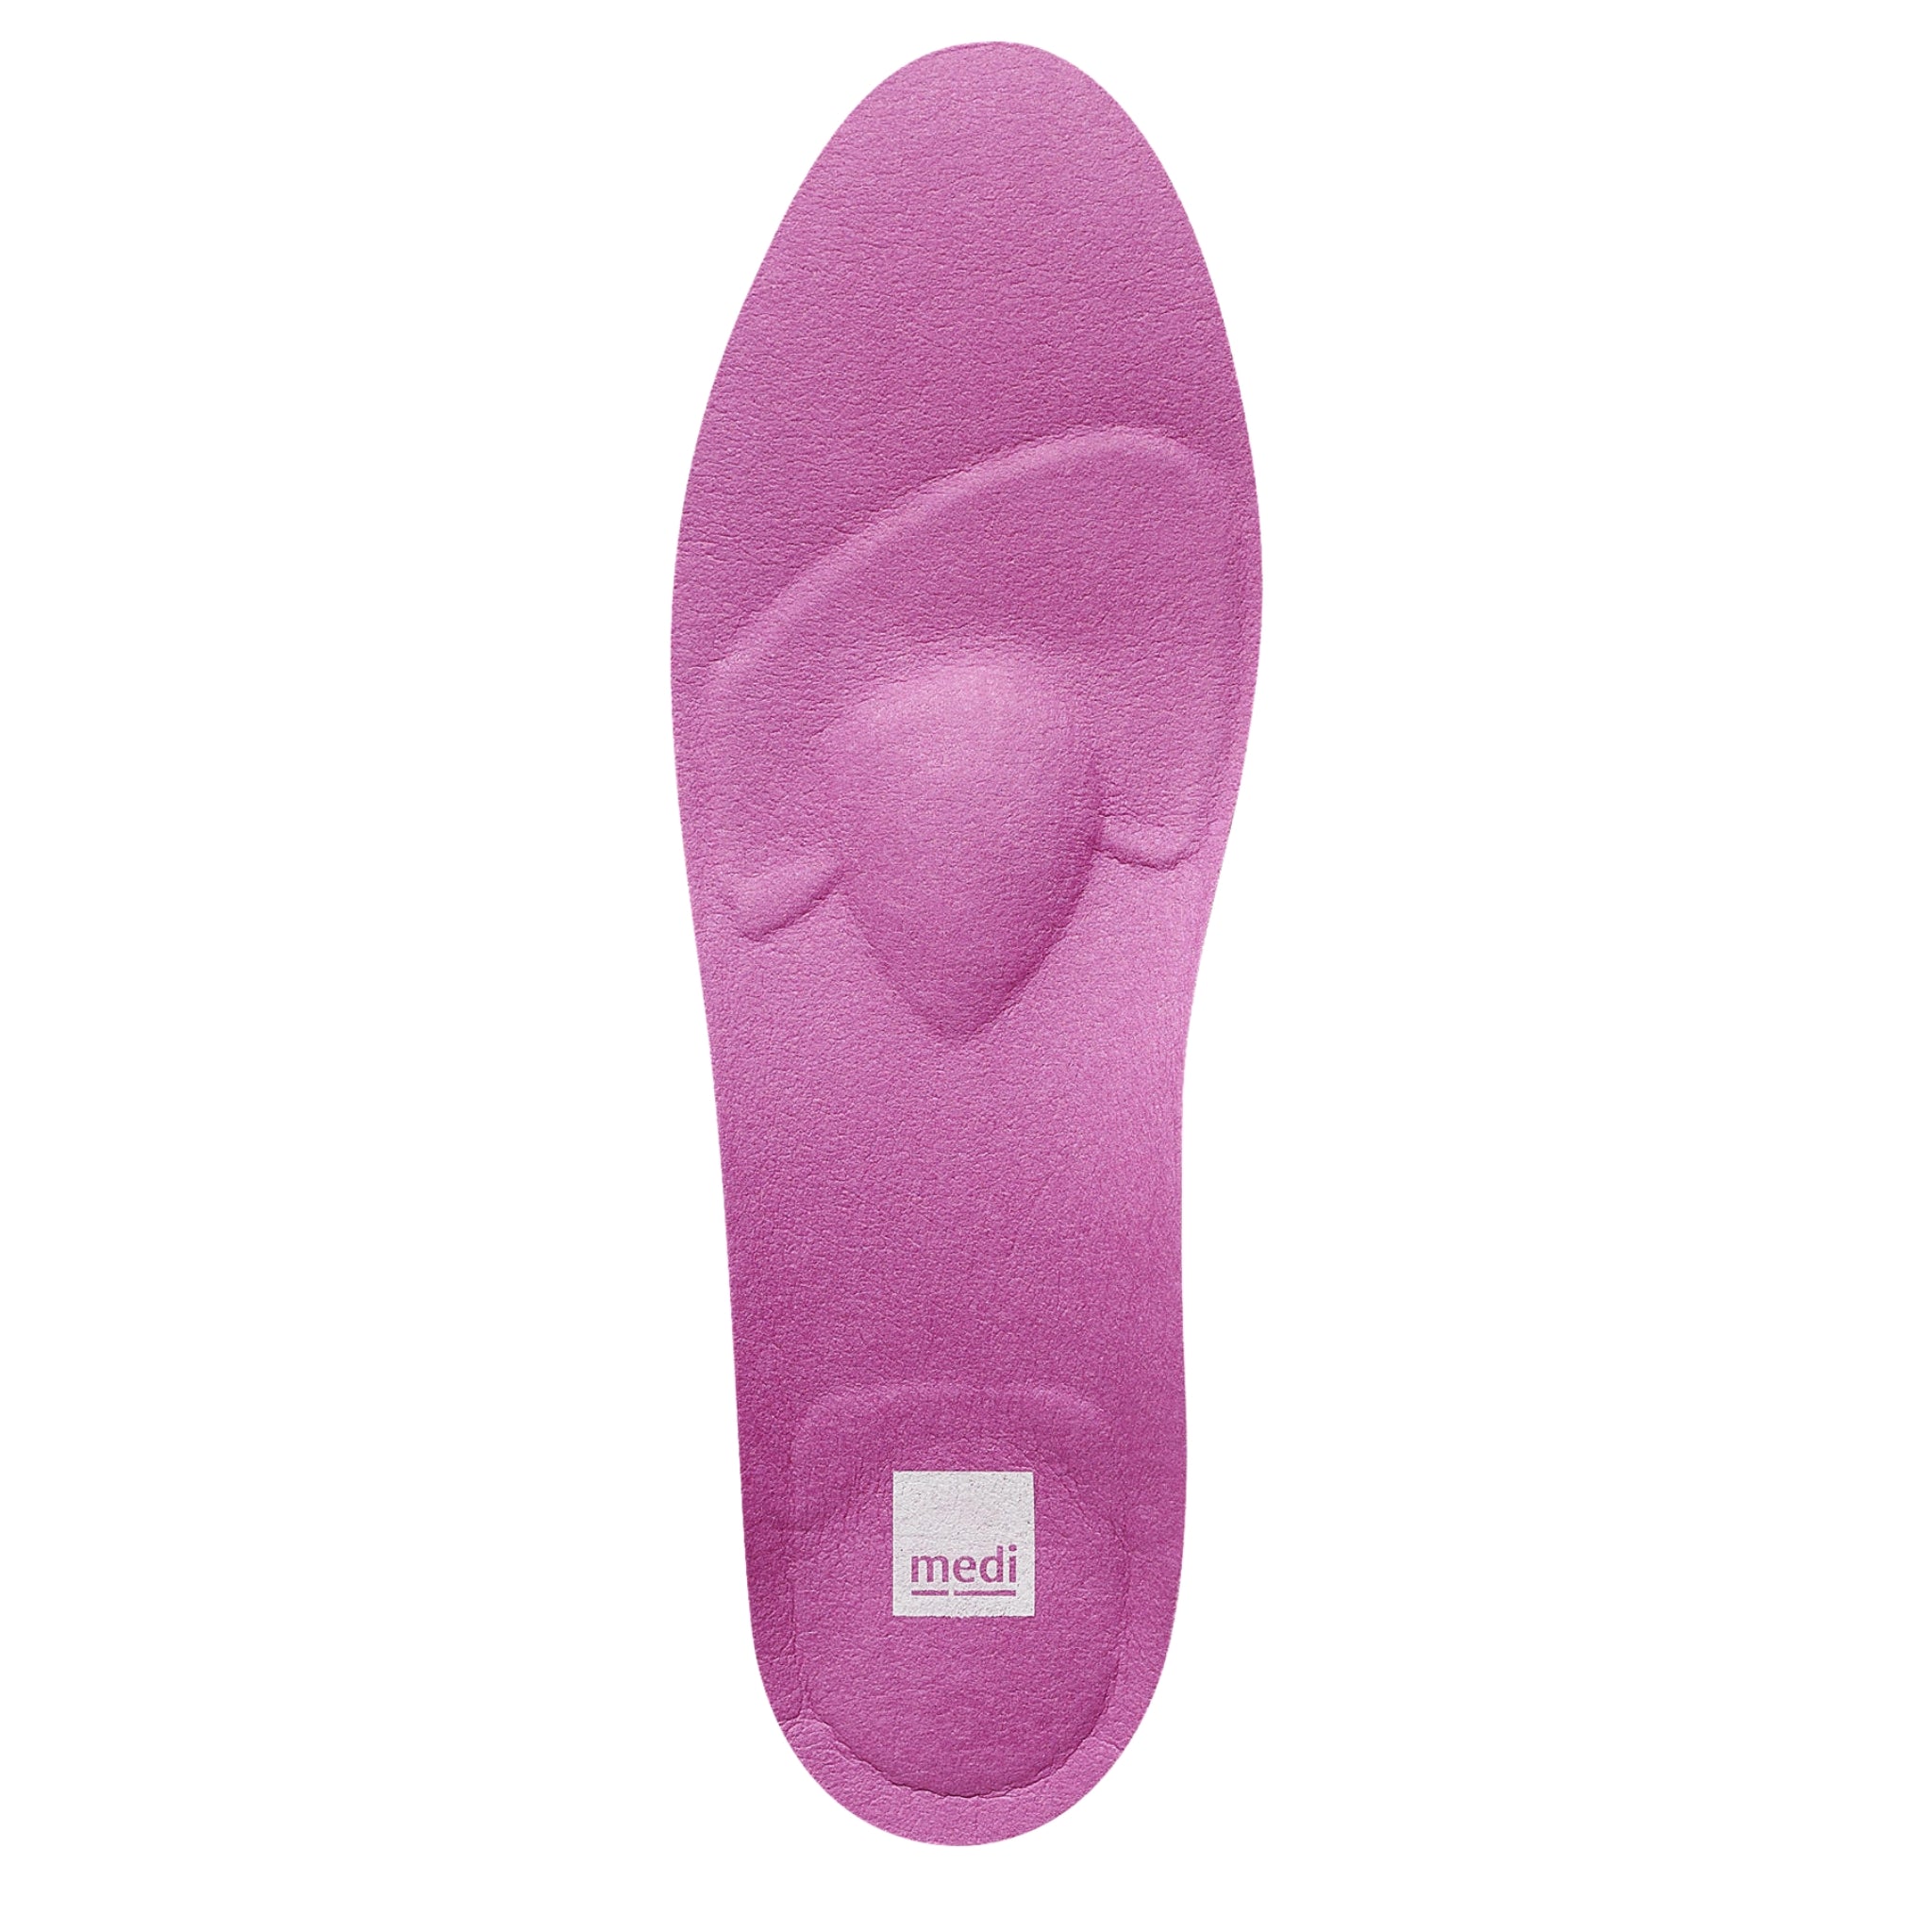 medi footsupport Ballerinas Pro | Foot Orthotic For Flat, Business & Fashion Shoes